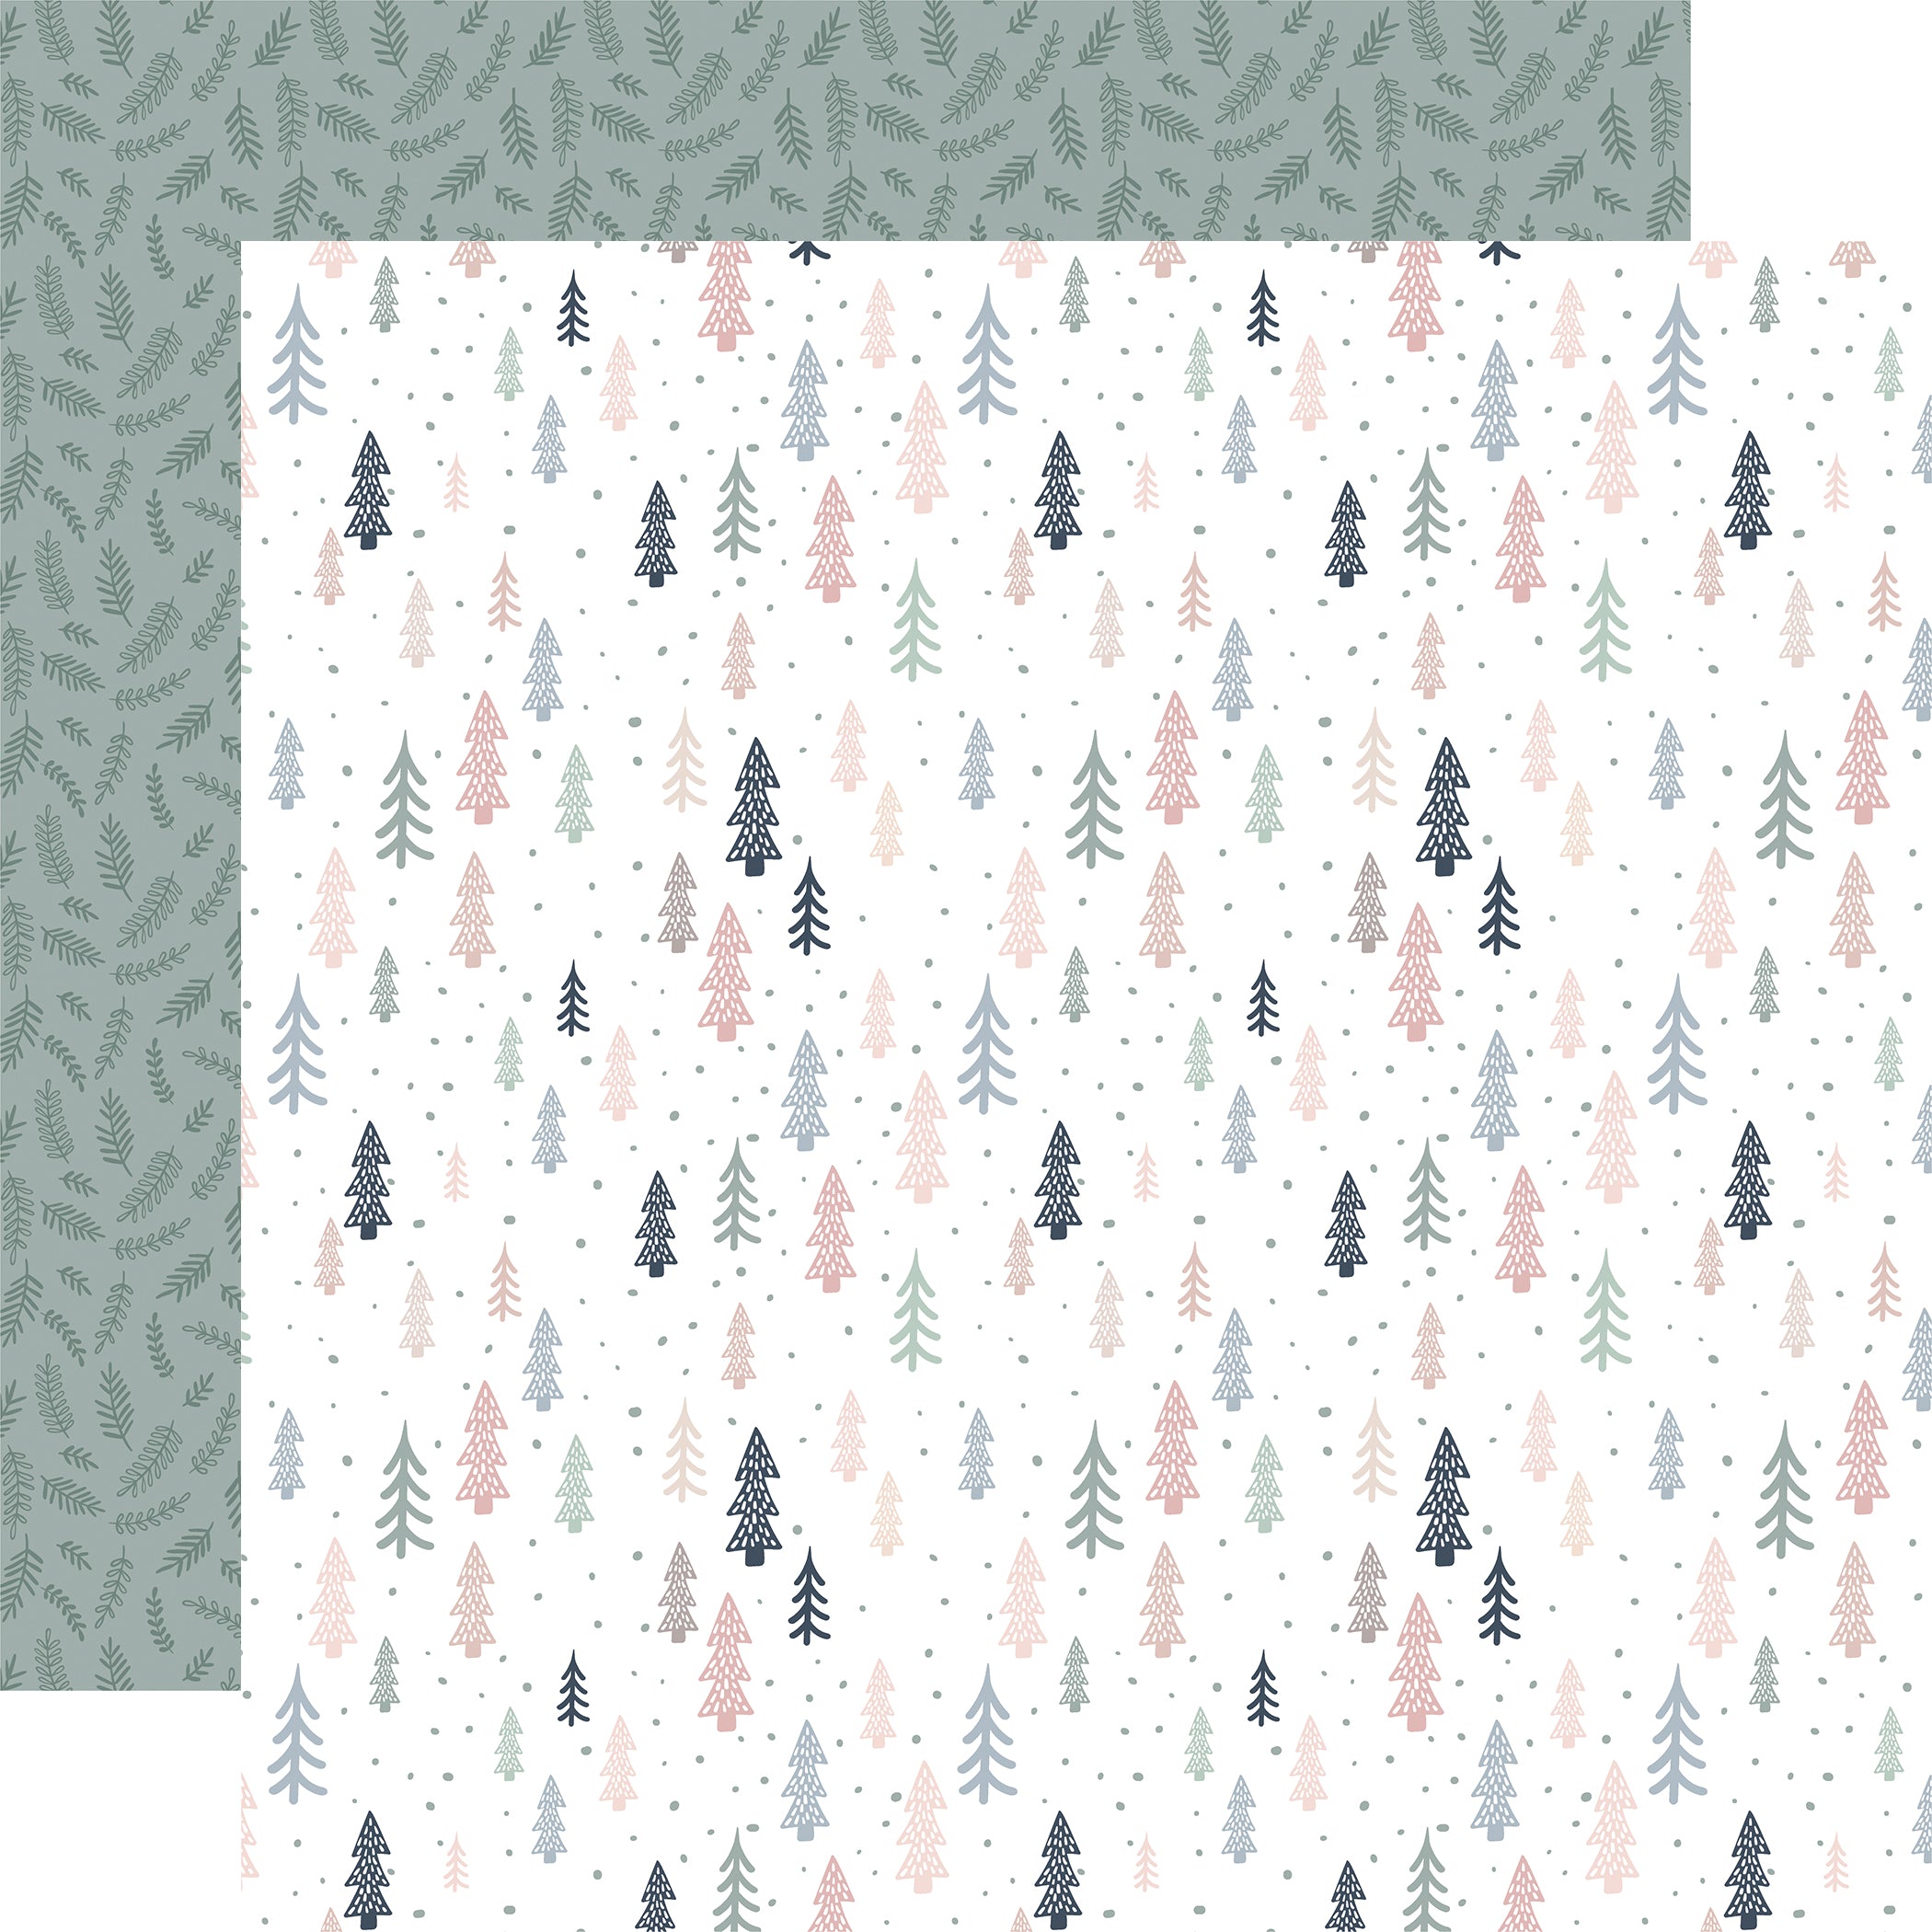 Winterland Collection Into The Woods 12 x 12 Double-Sided Scrapbook Paper by Echo Park Paper